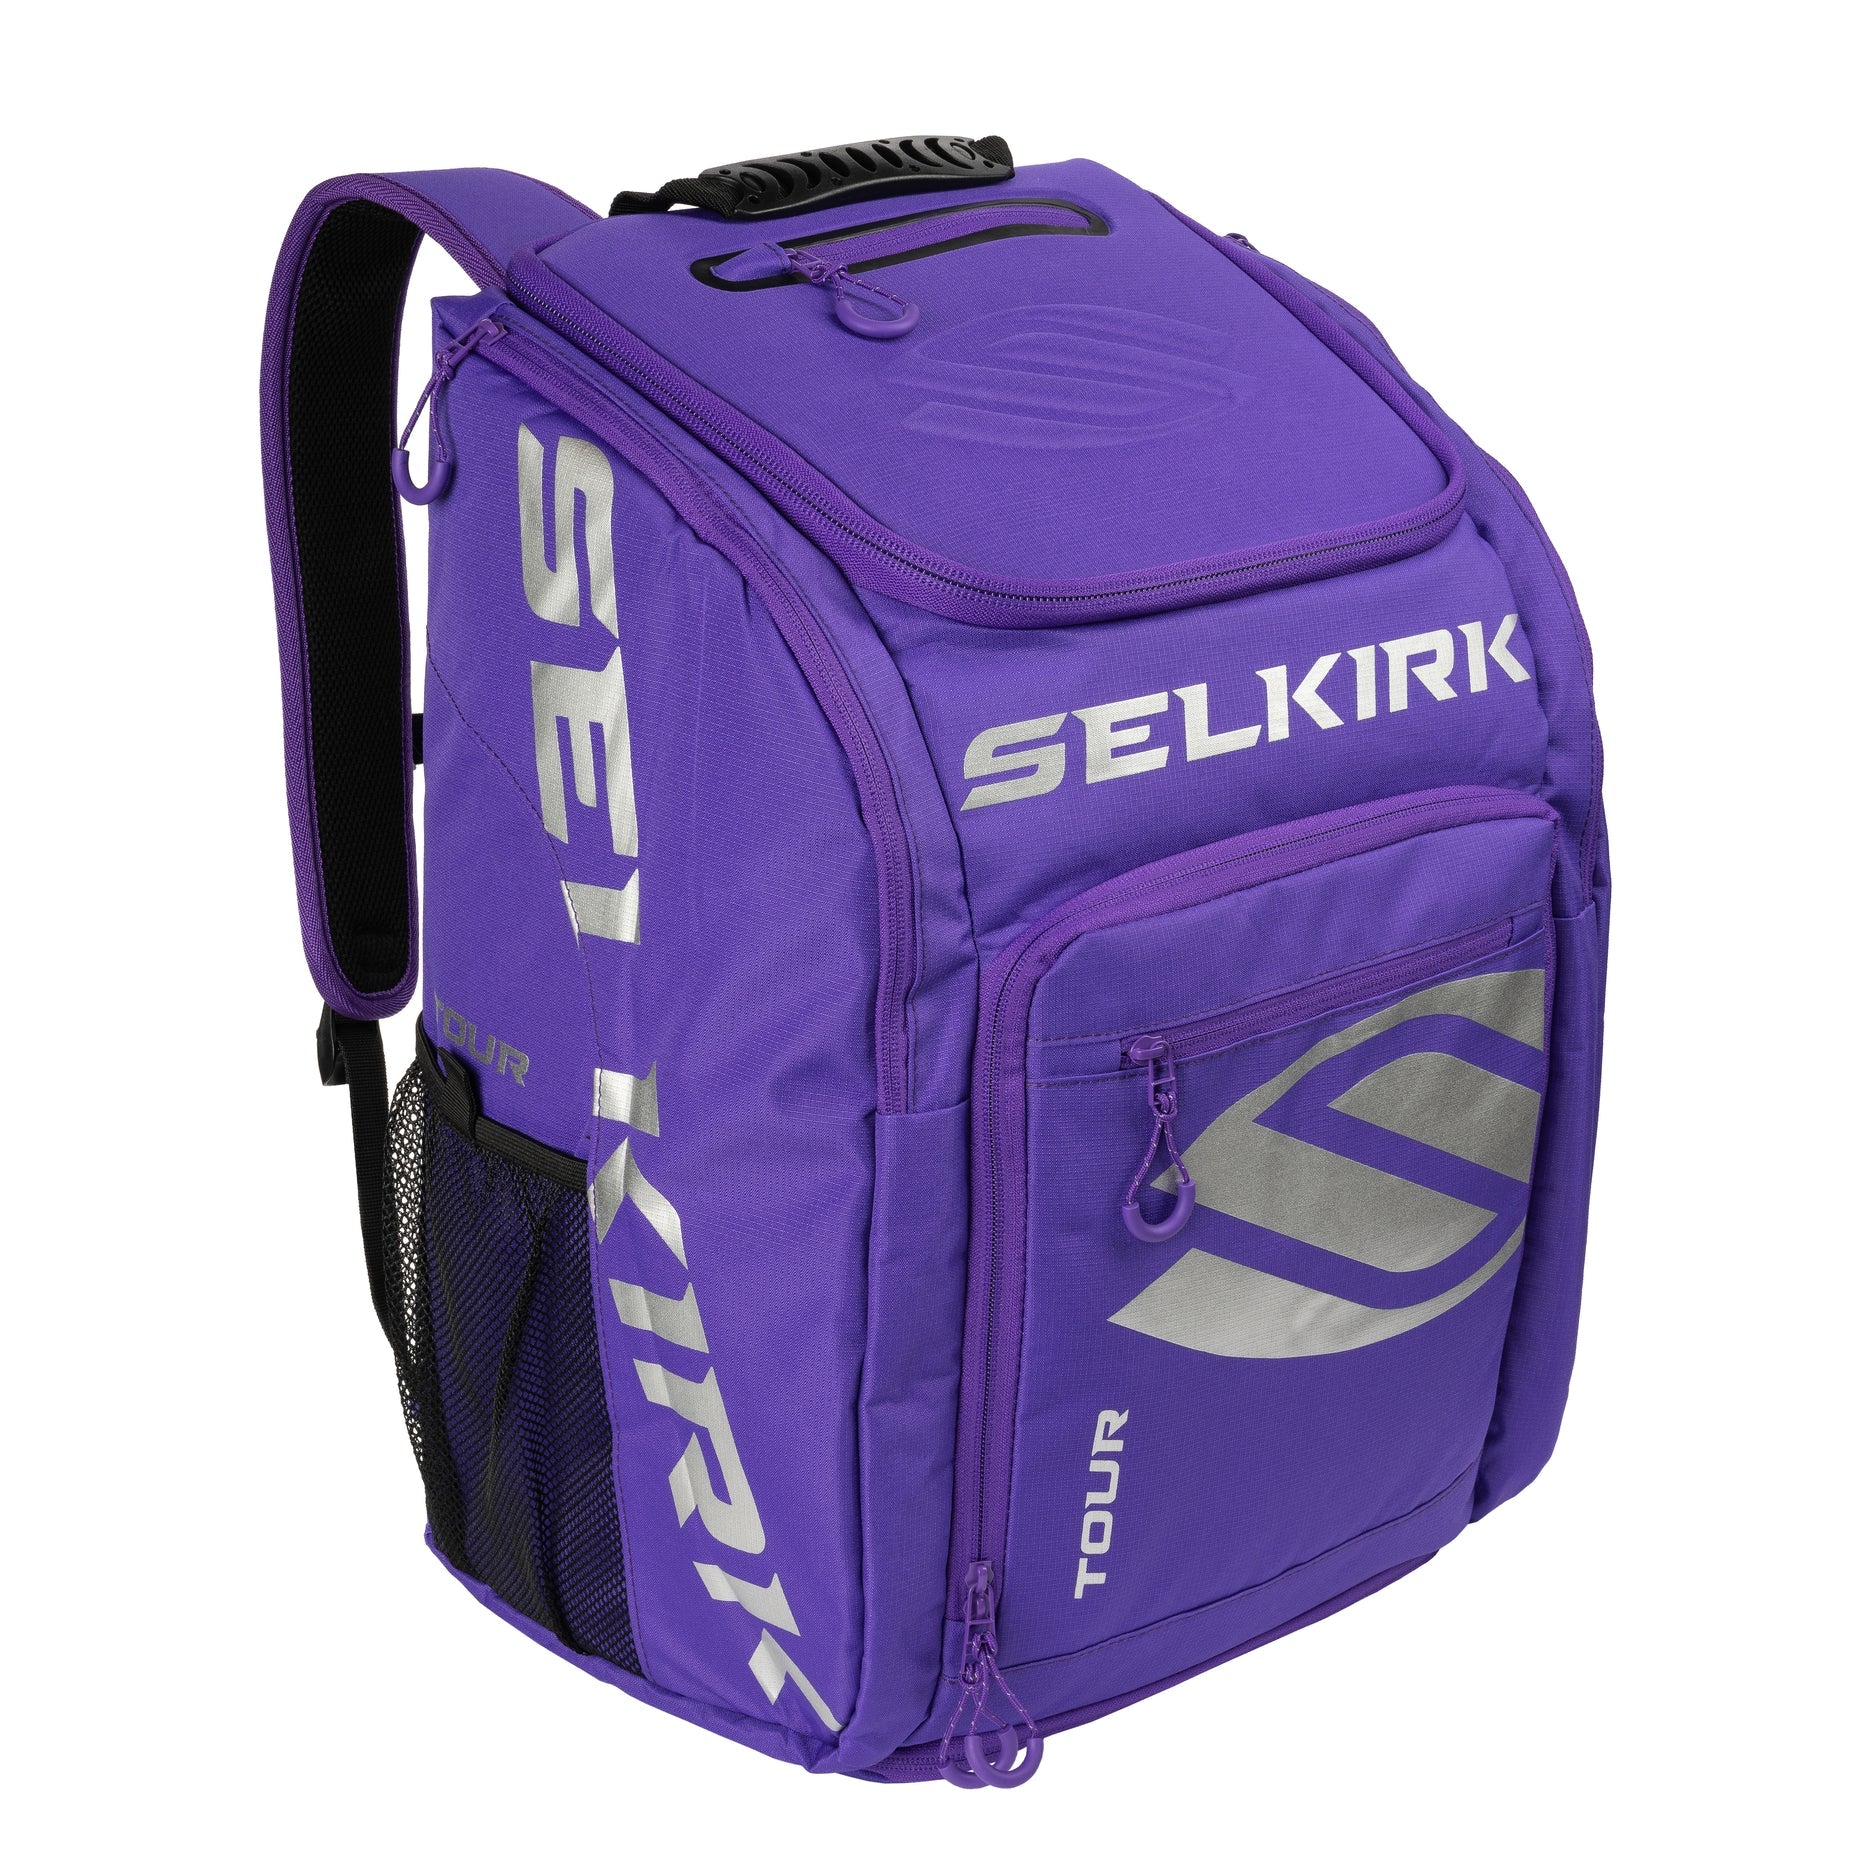 Selkirk Core Line Tour Bag - The Pickleball Store